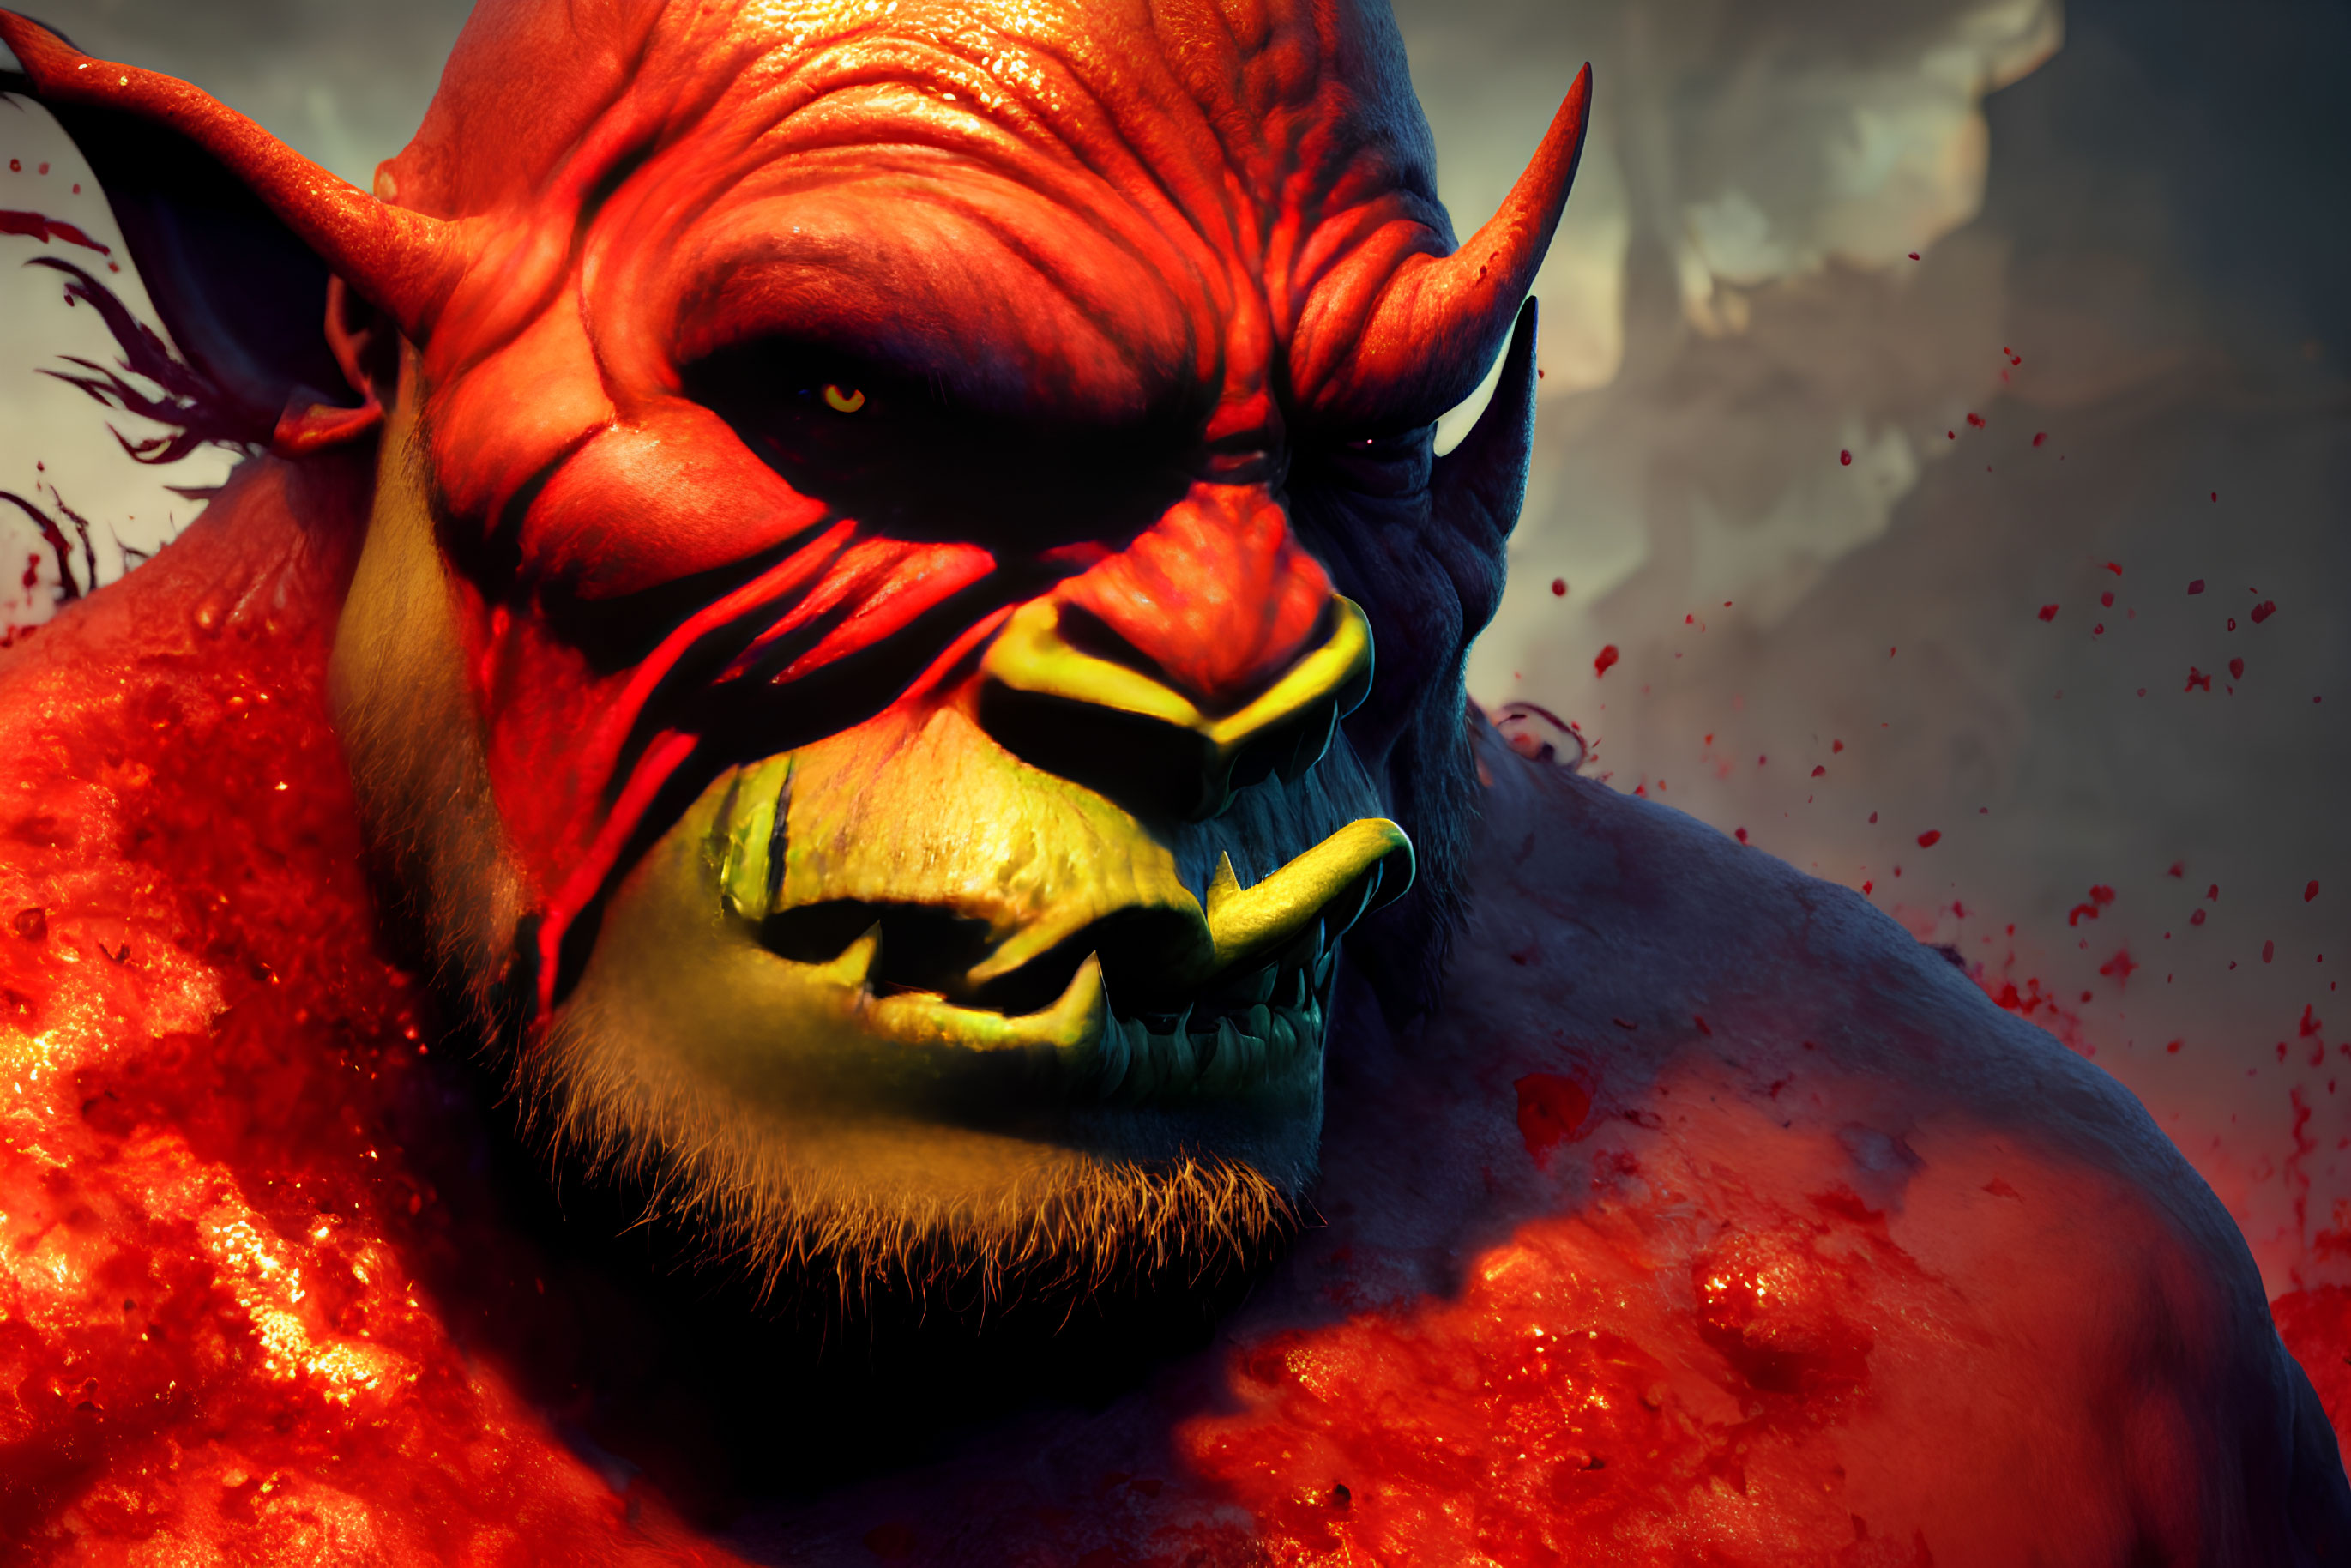 Detailed Close-Up of Menacing Red Demon with Sharp Horns and Glaring Eyes